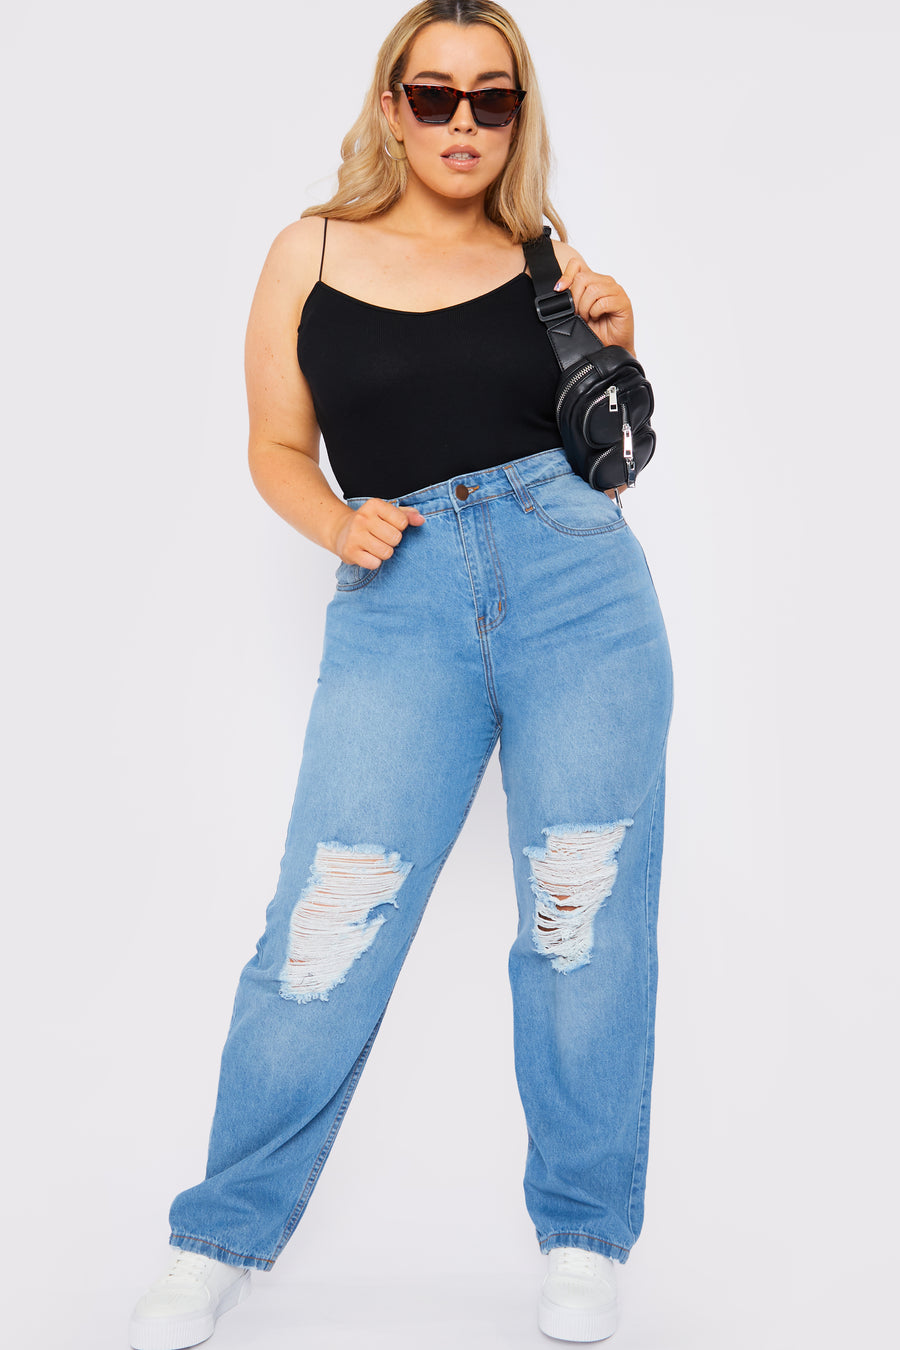 Full body style shot of a standing plus size female model wearing JMOJO Light Blue Wash High Waisted Straight Leg Ripped Jeans holding a handbag over her shoulder and wearing sunglasses